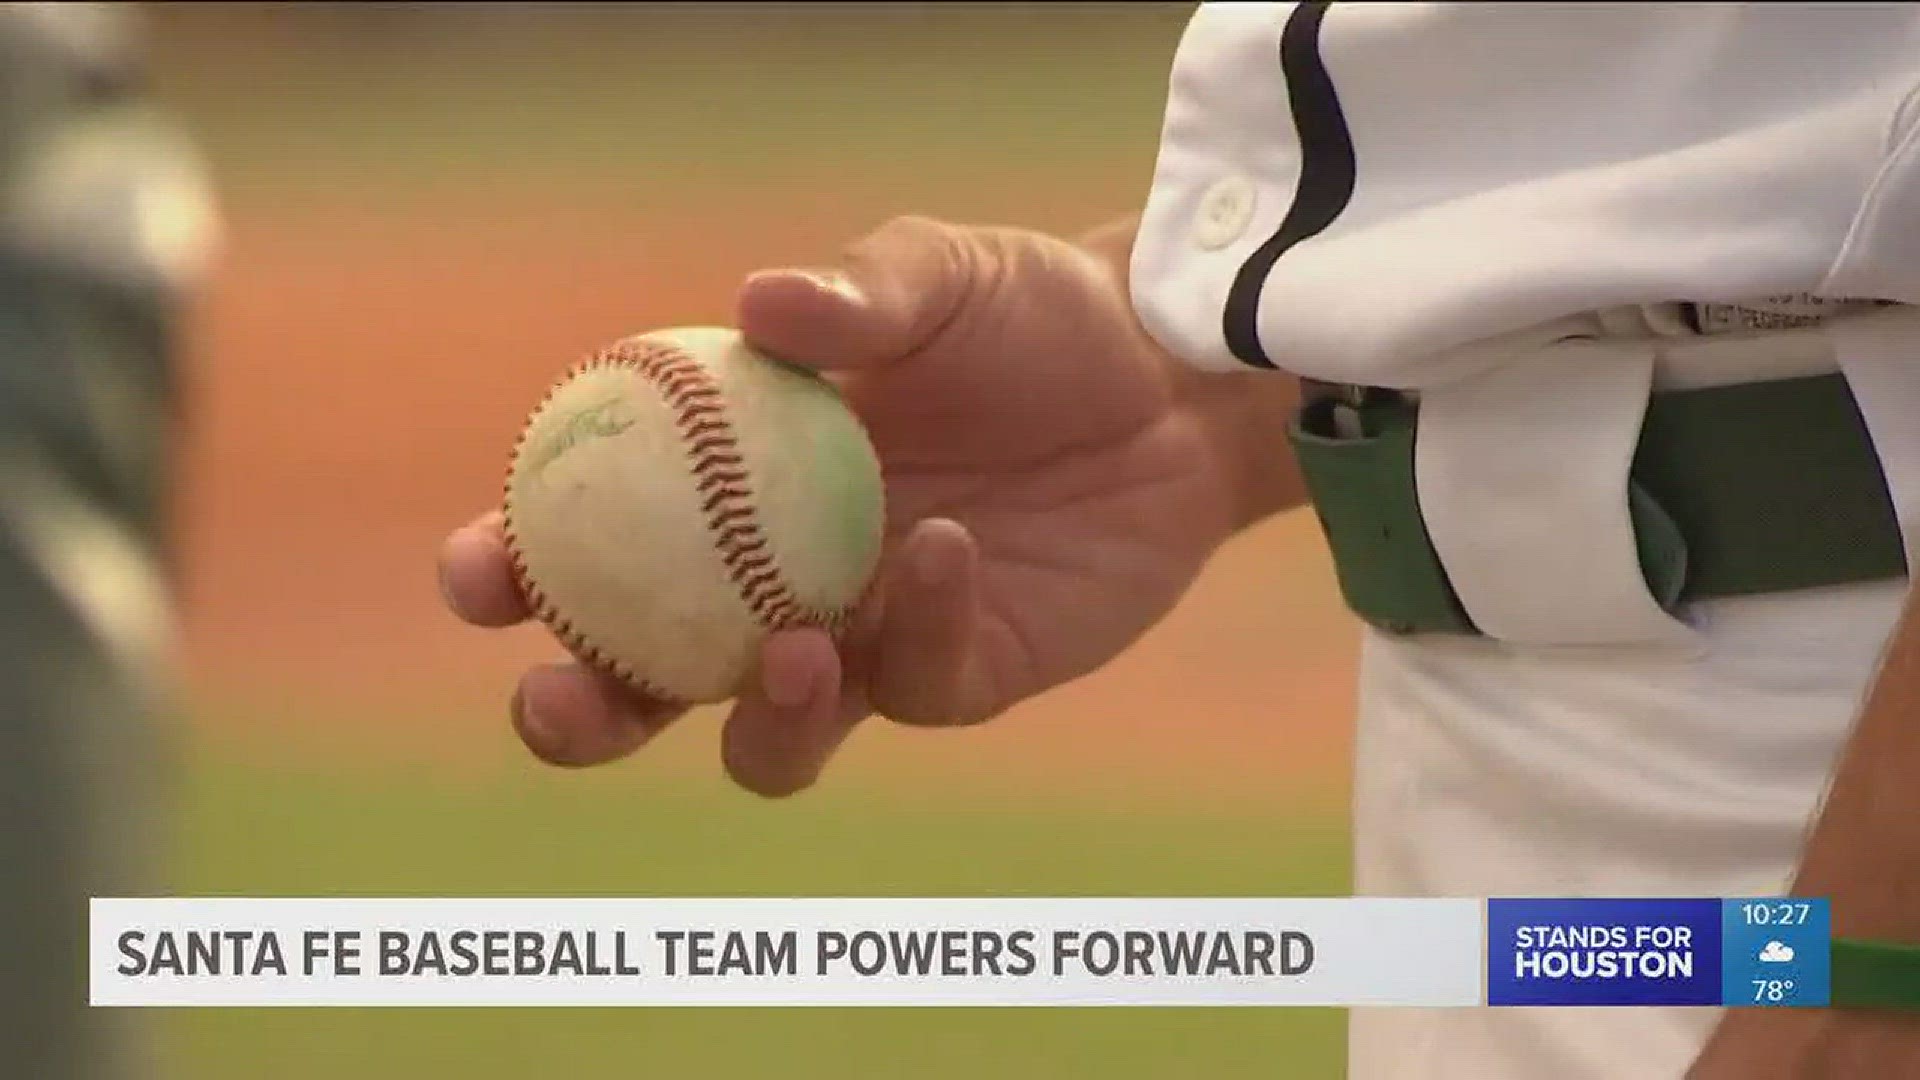 The Santa Fe High School baseball team decided to play in Saturday's scheduled game for the families and community of Santa Fe.